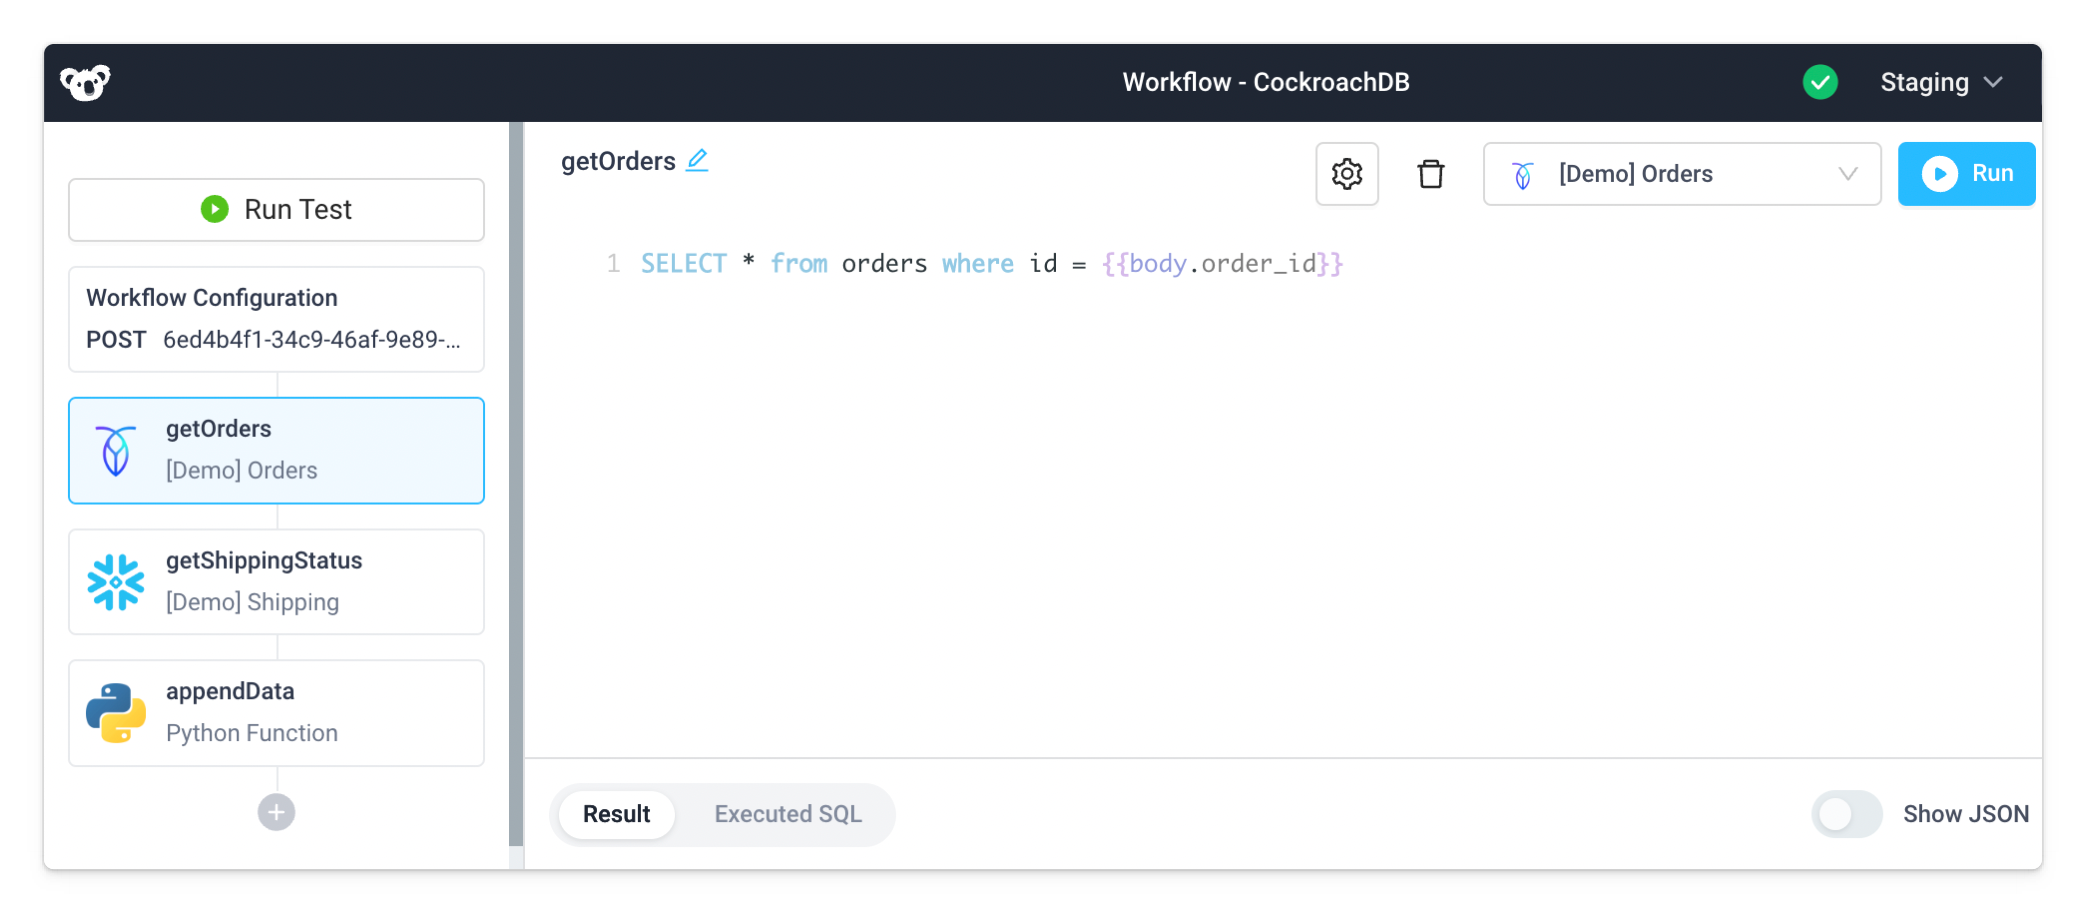 Admin dashboard reads from CockroachDB allowing for order refunds